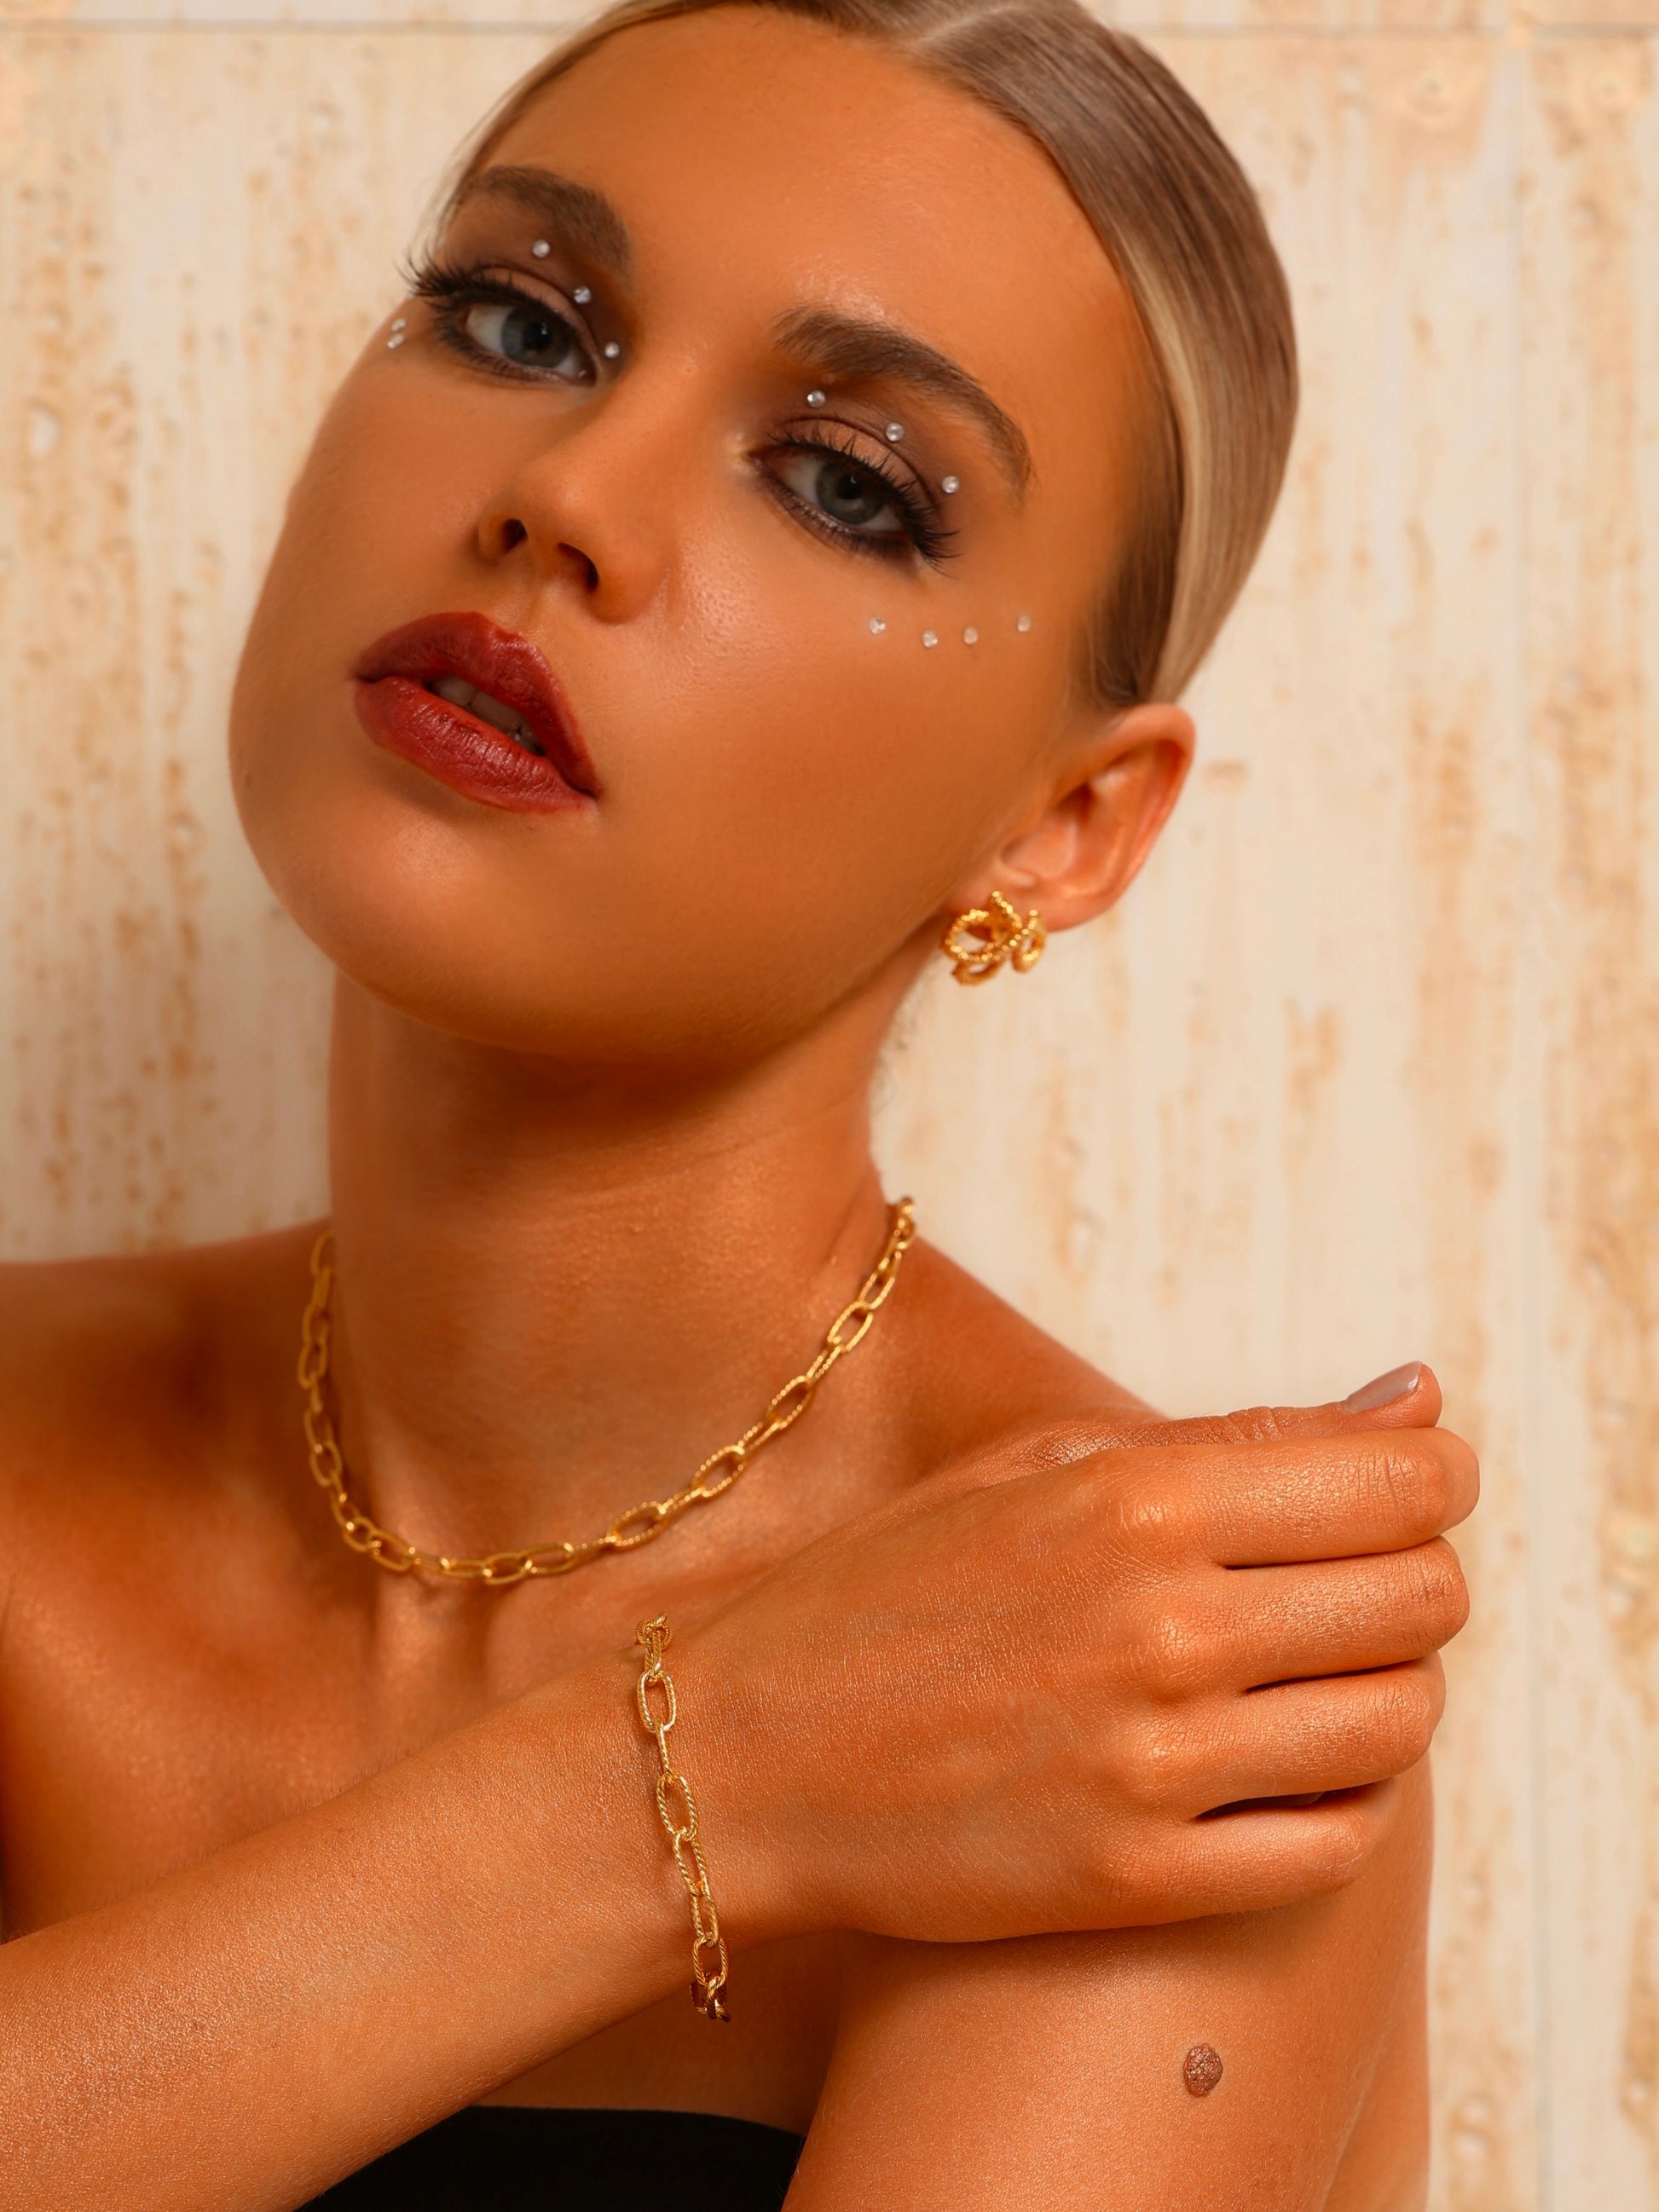 Paper Clip Chain Necklace - 18K Gold Plated - Hypoallergenic - Necklace - ONNNIII